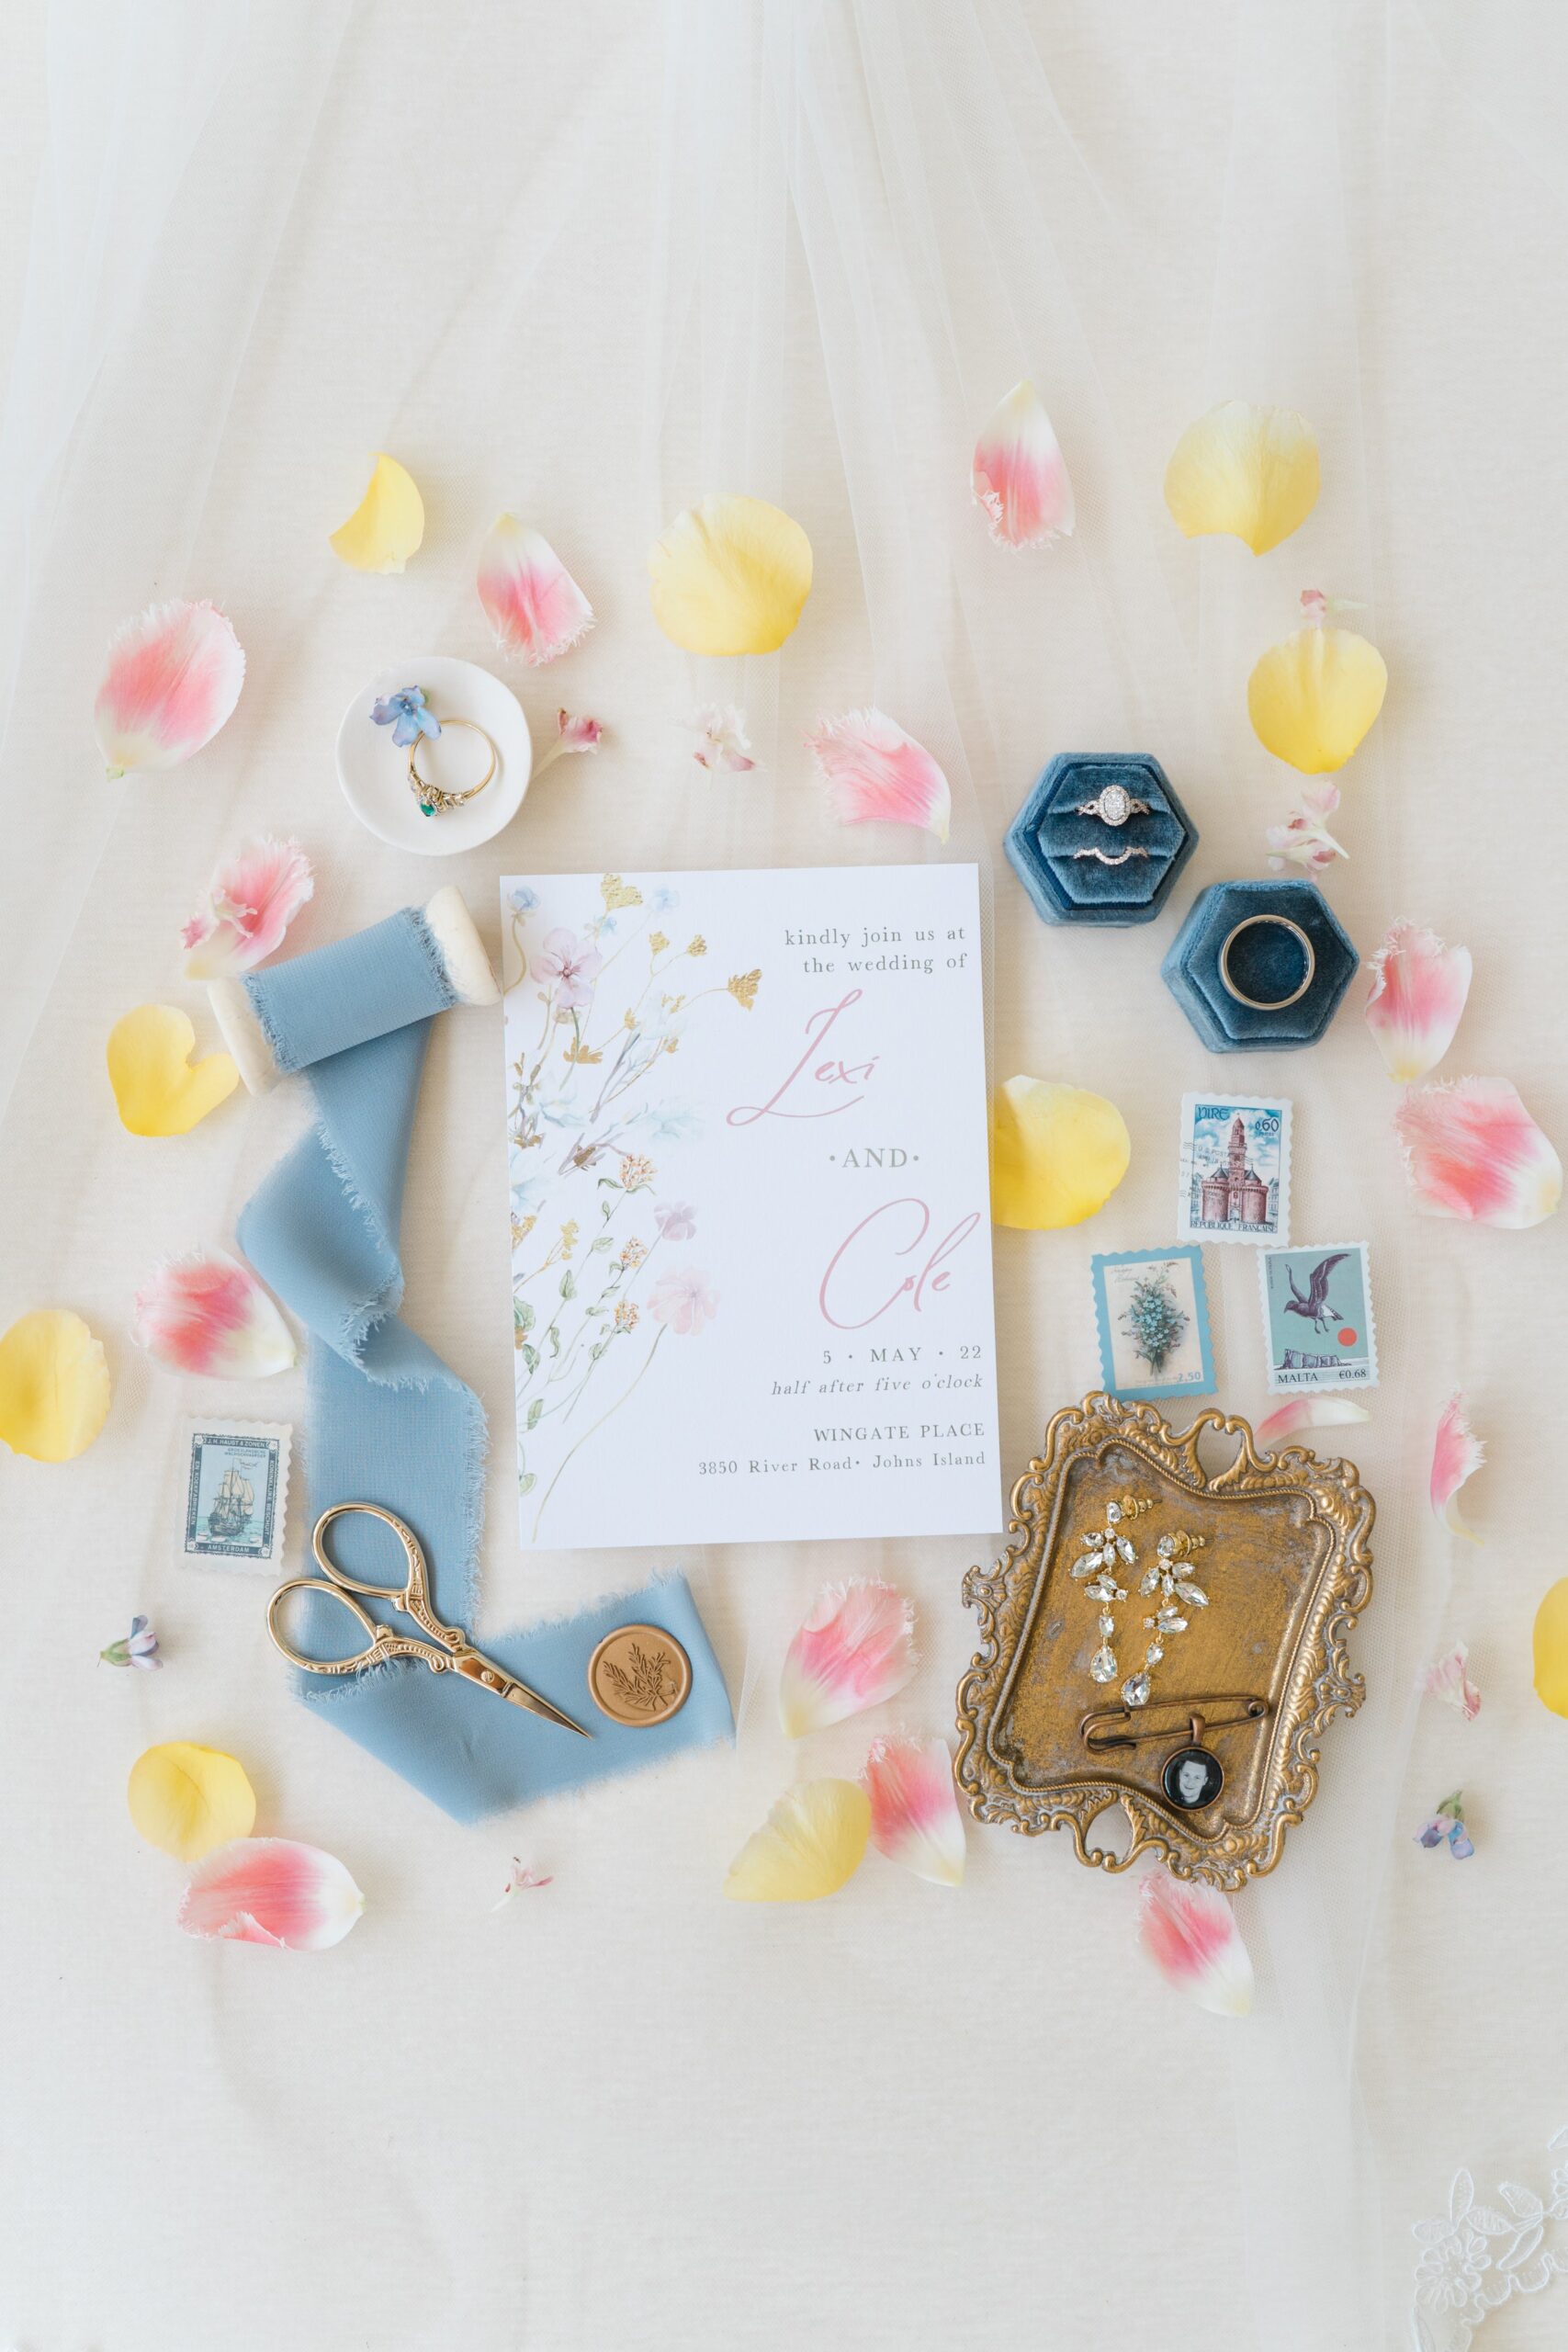 wedding invitation with flower petals and blue ribbon